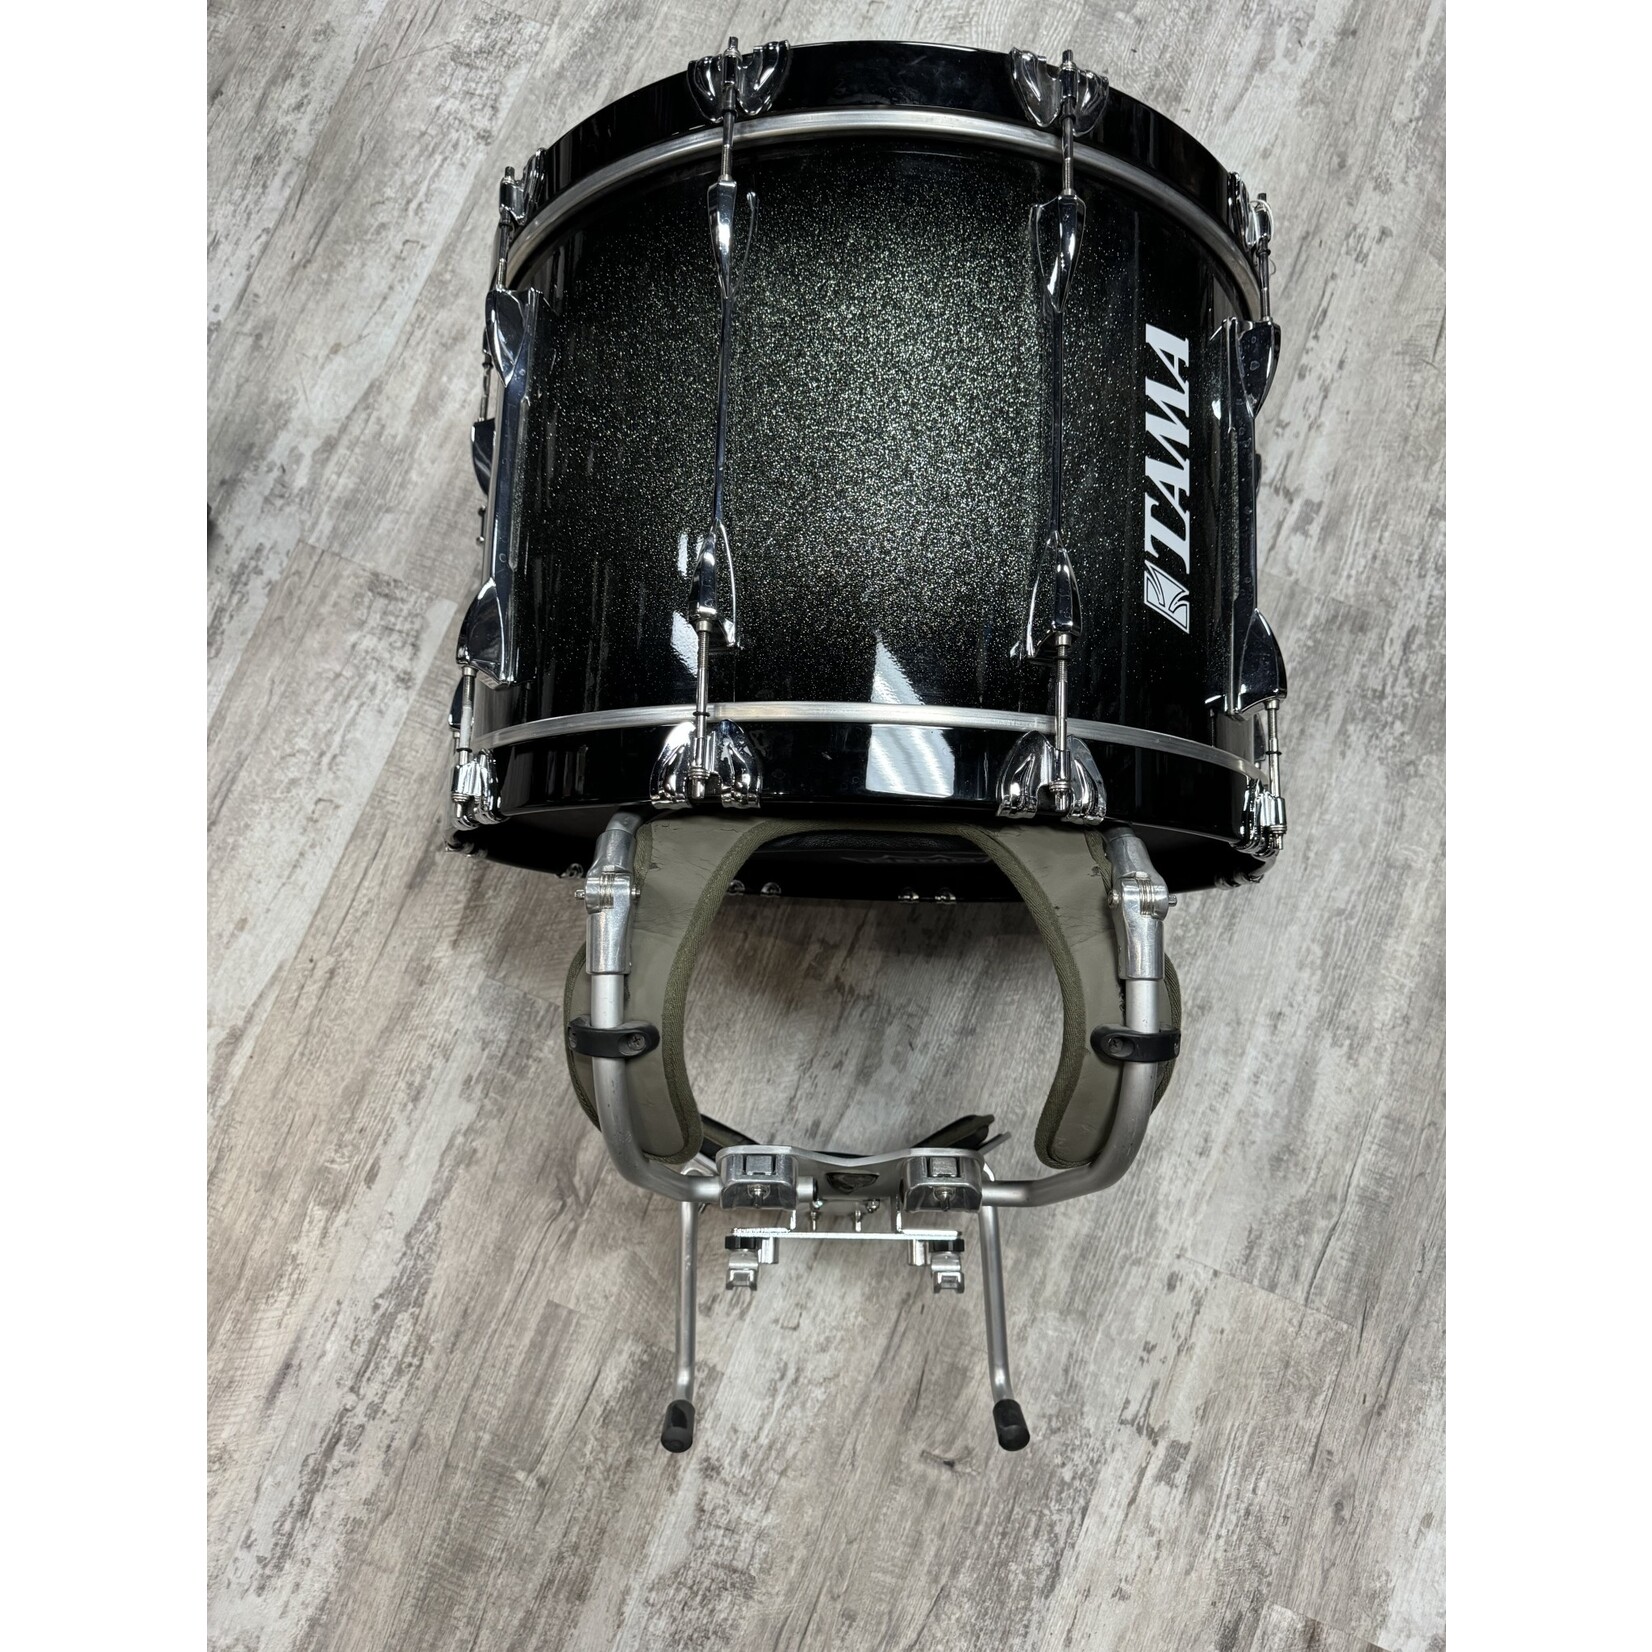 Tama USED Tama 22" Marching Bass Drum (Dark Star Dust Fade) w/ Carrier